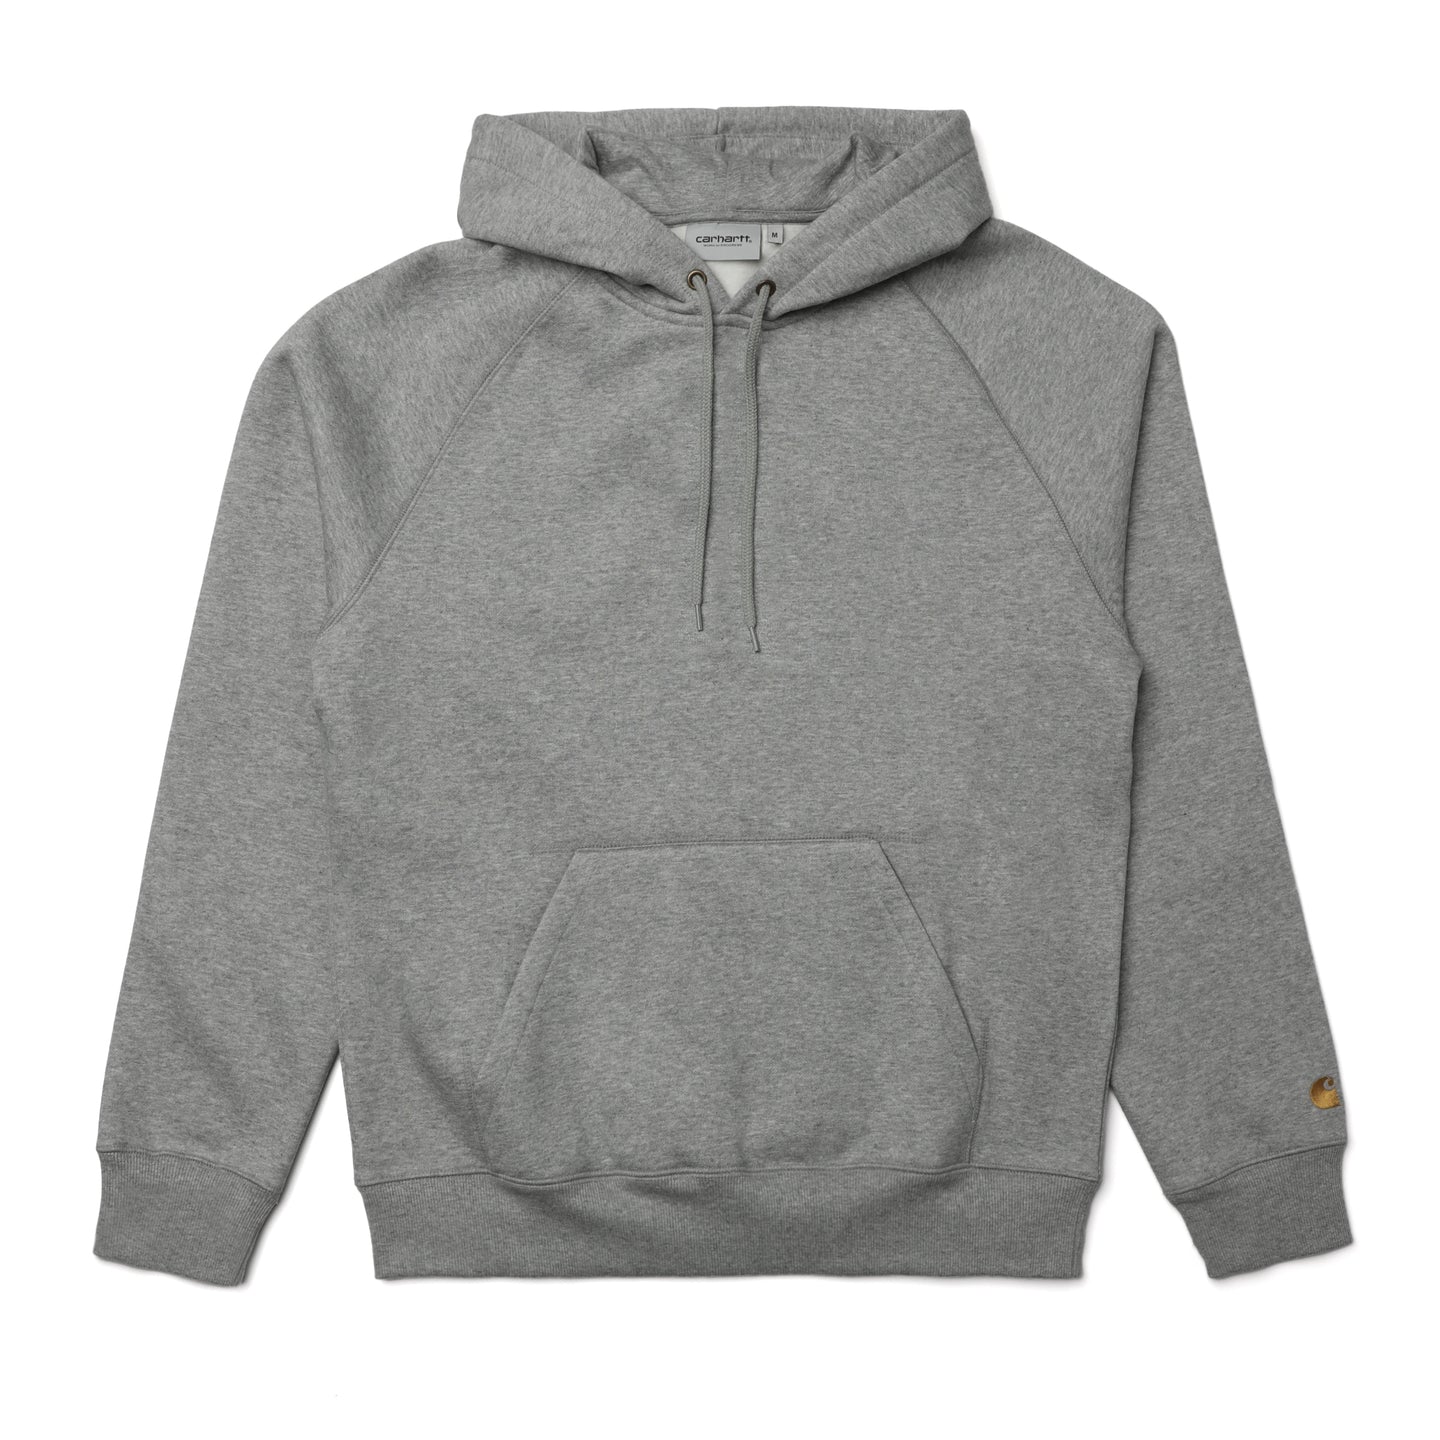 Carhartt WIP Hooded Chase Sweater Grey Heather